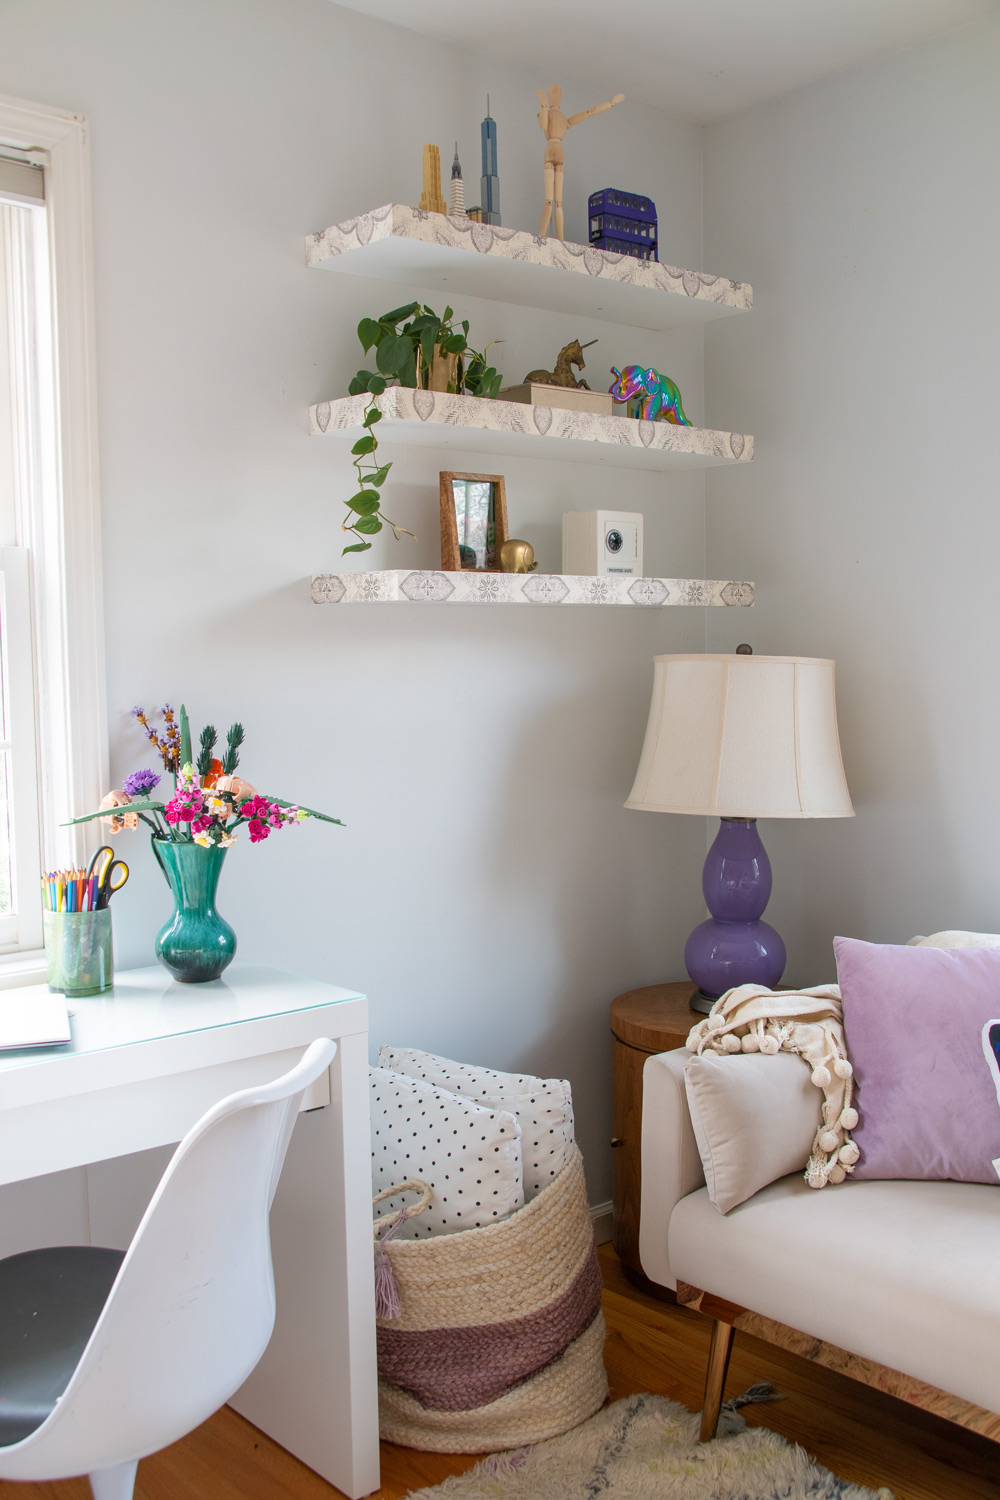 Decorated floating shelves, basket, and loveseat with purple and butterfly throw pillow.